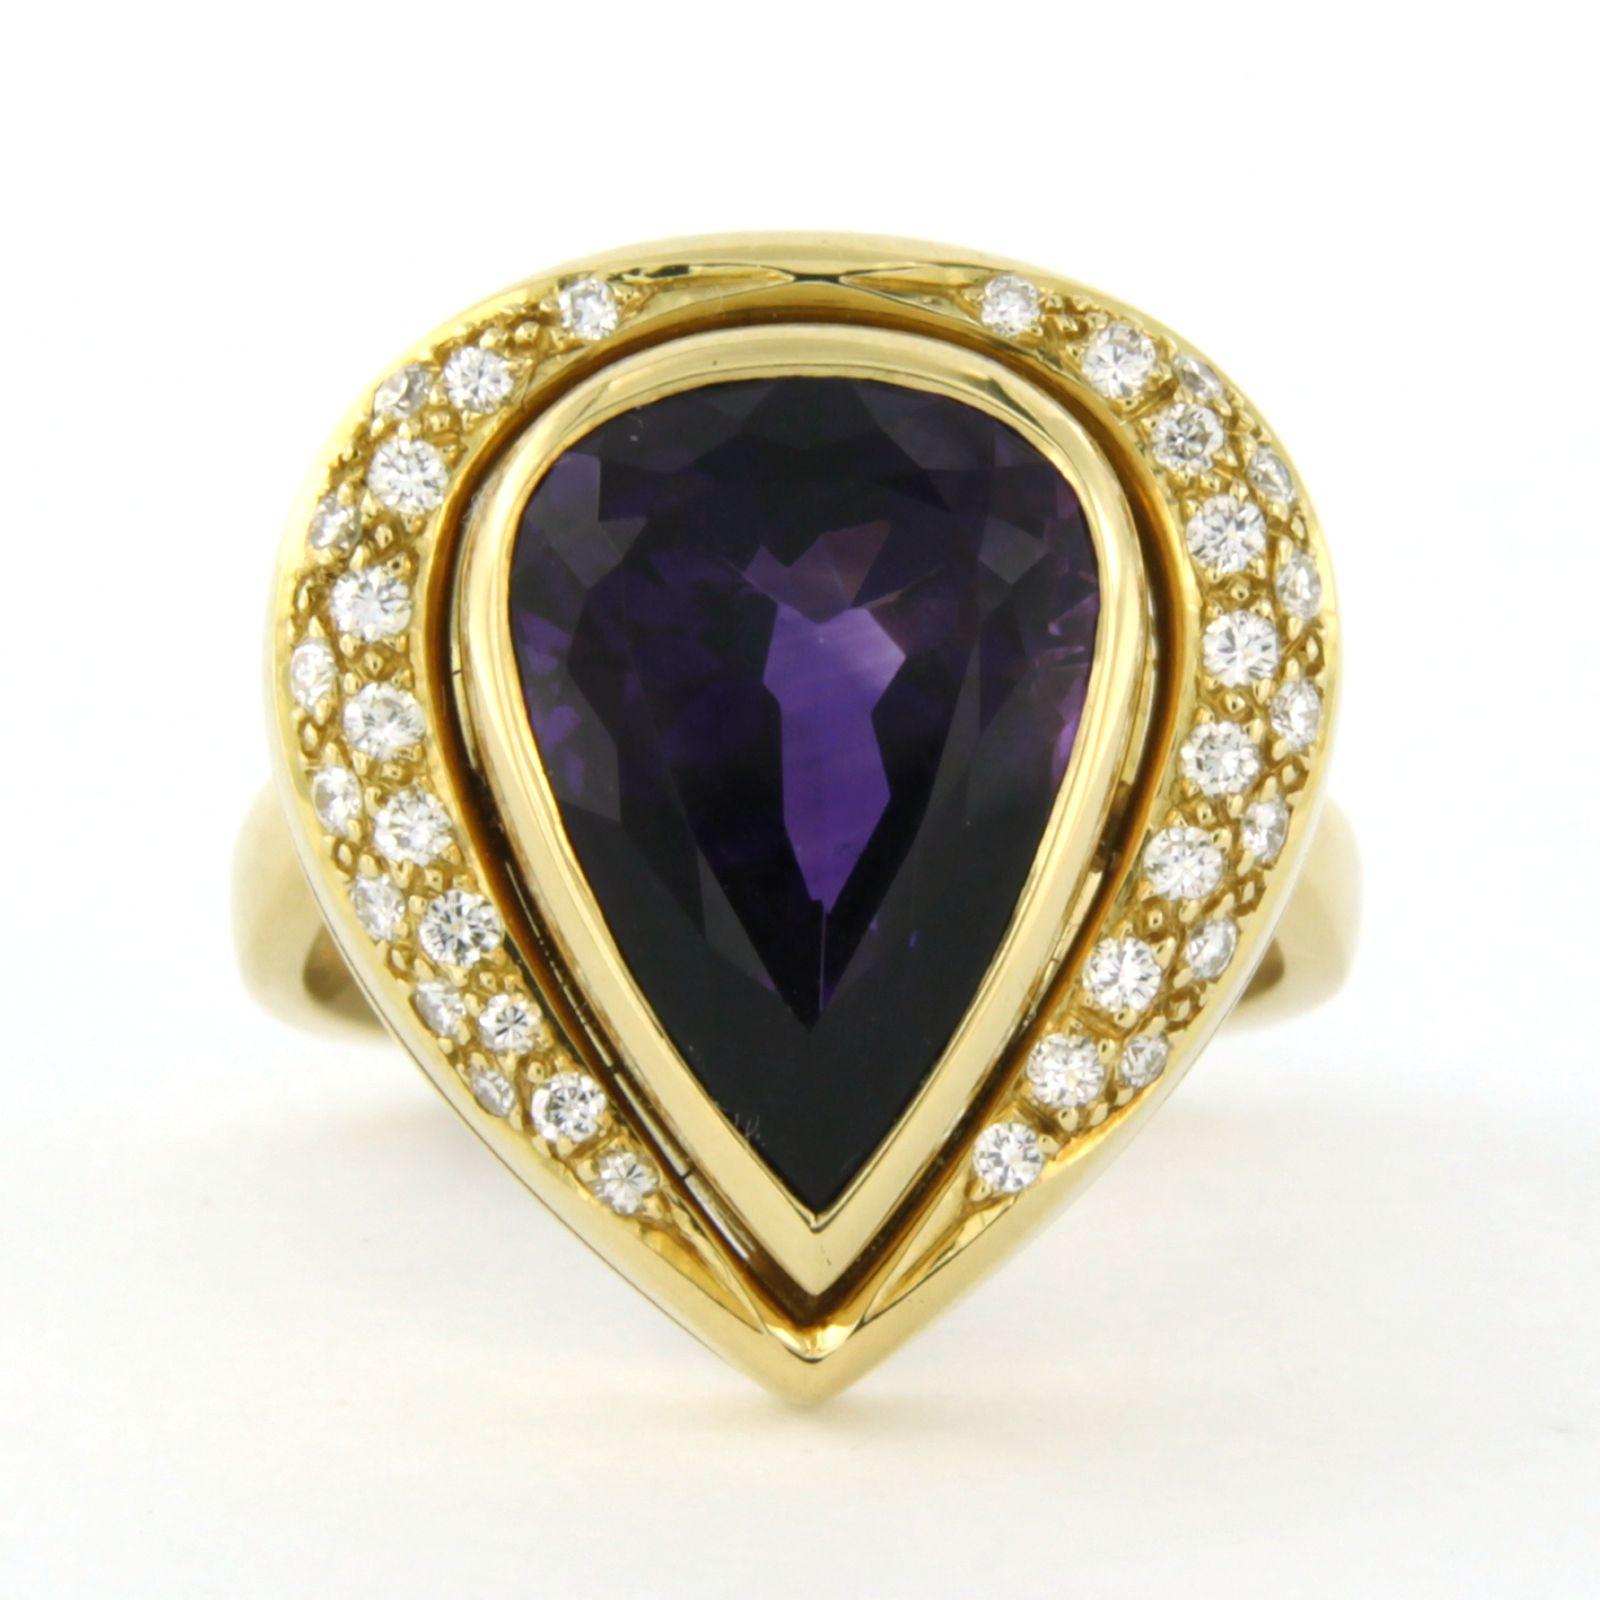 18k yellow gold ring set with amethyst and brilliant cut diamond. 0.50ct - F/G - VS/SI - ring size U.S. 7.25 – EU. 17.5(55)

detailed description:

The top of the ring is in an oval shape measuring 1.5 cm by 1.4 cm wide by 7.8 mm high

Ring size US